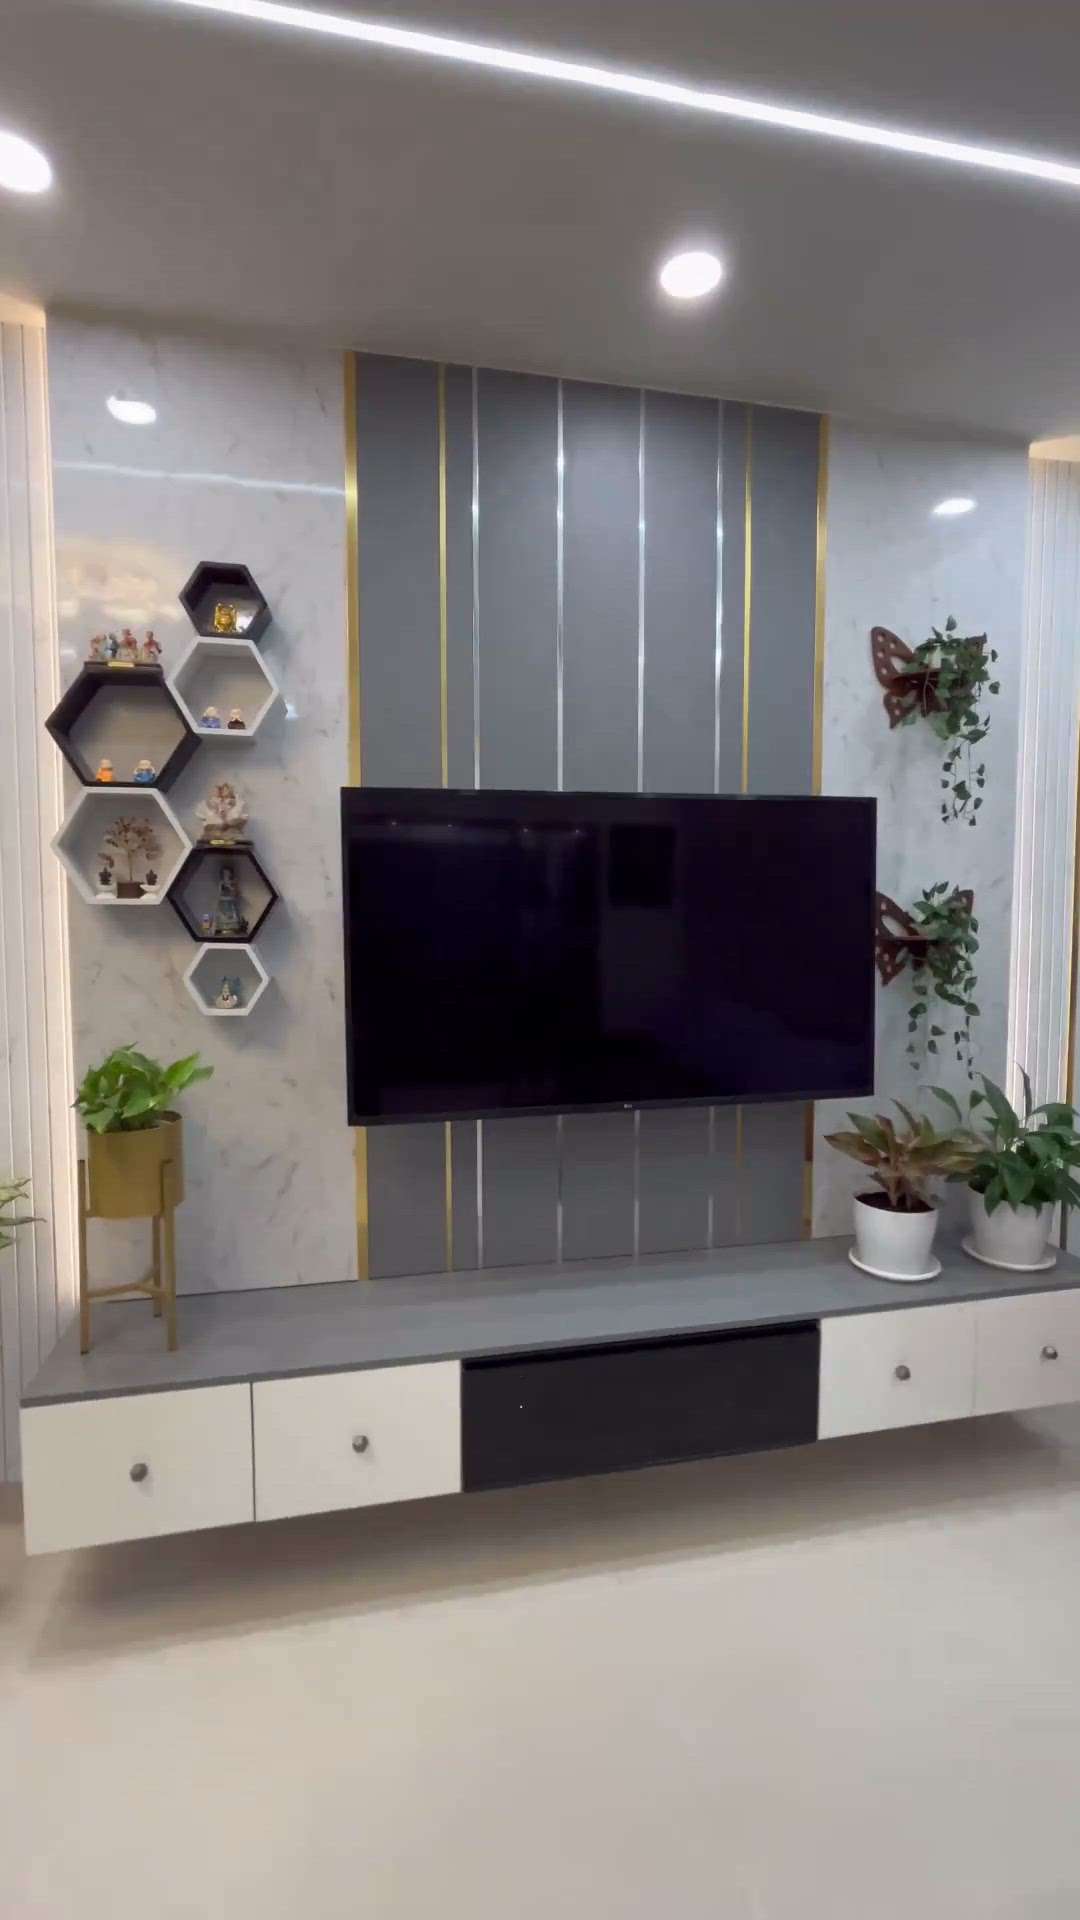 Looking for one-stop interior design solutions for your dream home or office? 😍

At Pine And Pillars, we don't just build homes but craft your desires into fresh designs to make you fall in love with your home! ✨
Get your dream home designed by us 💫furniture 
📩 Comment or DM ' smart ' to order
📞Contact - +91 80958 47005
💻 https://pineandpillars.com/
Follow 👉@pineandpillarofficial
Follow👉 @pineandpillarofficial
Follow👉 @pineandpillarofficial
➖➖➖➖➖➖➖➖ #interiordesign #designinterior #interiordesigner #designdeinteriores #interiordesignideas #interiordesigners #designerdeinteriores #interiordesigns #interiordesigninspiration
.
.
.
#interiordesign #designinterior #interiordesigner #designdeinteriores #interiordesignideas #interiordesigners #designerdeinteriores #interiordesigns #interiordesigninspiration